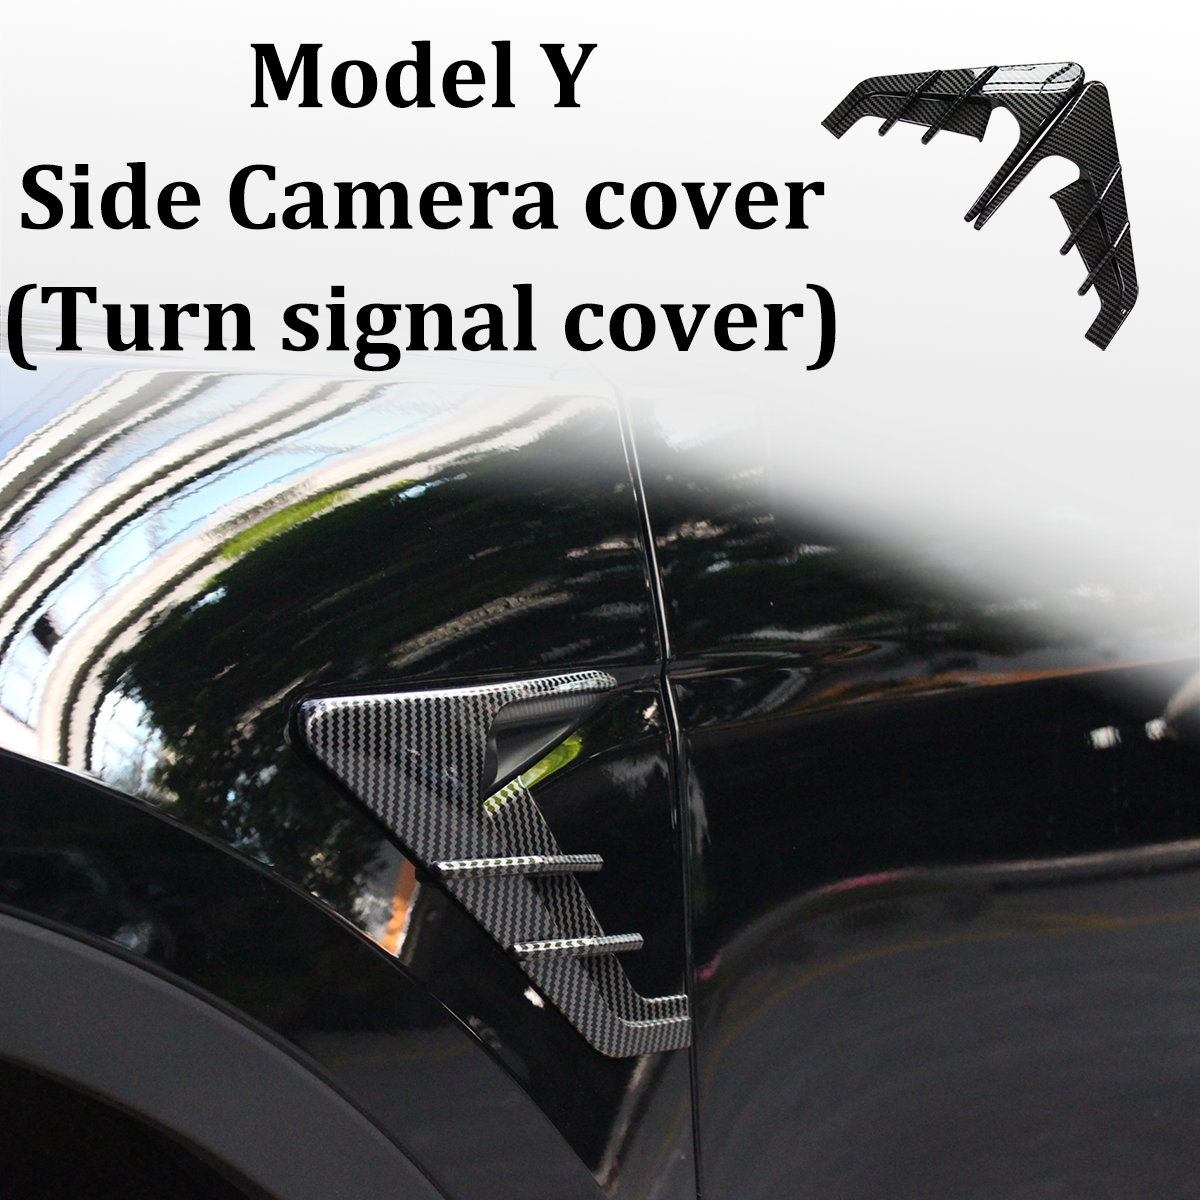 Tesla Model Y Turn Signal Cover from AOSK